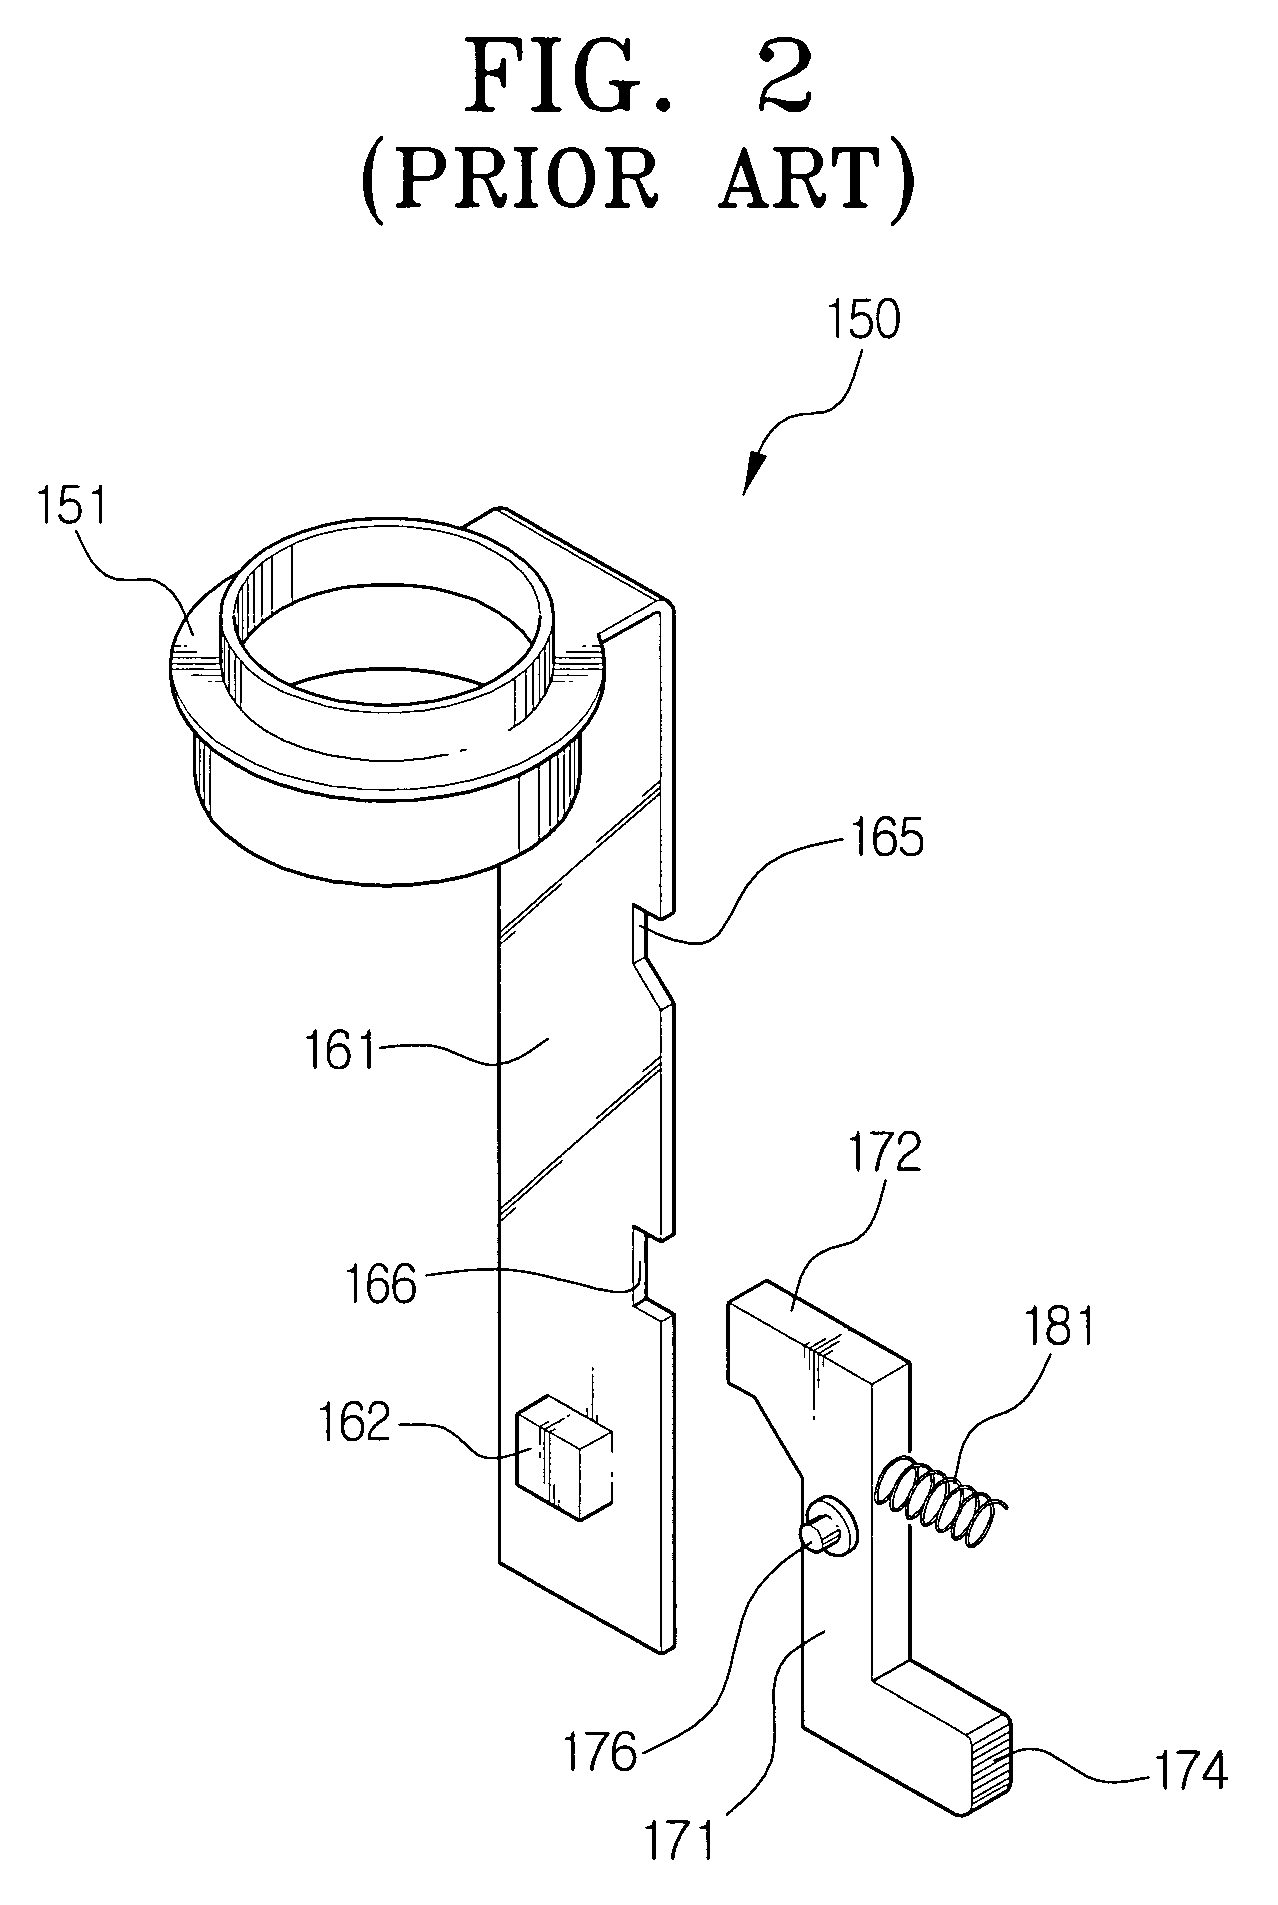 Filter assembly for cyclone type dust collecting apparatus of a vacuum cleaner